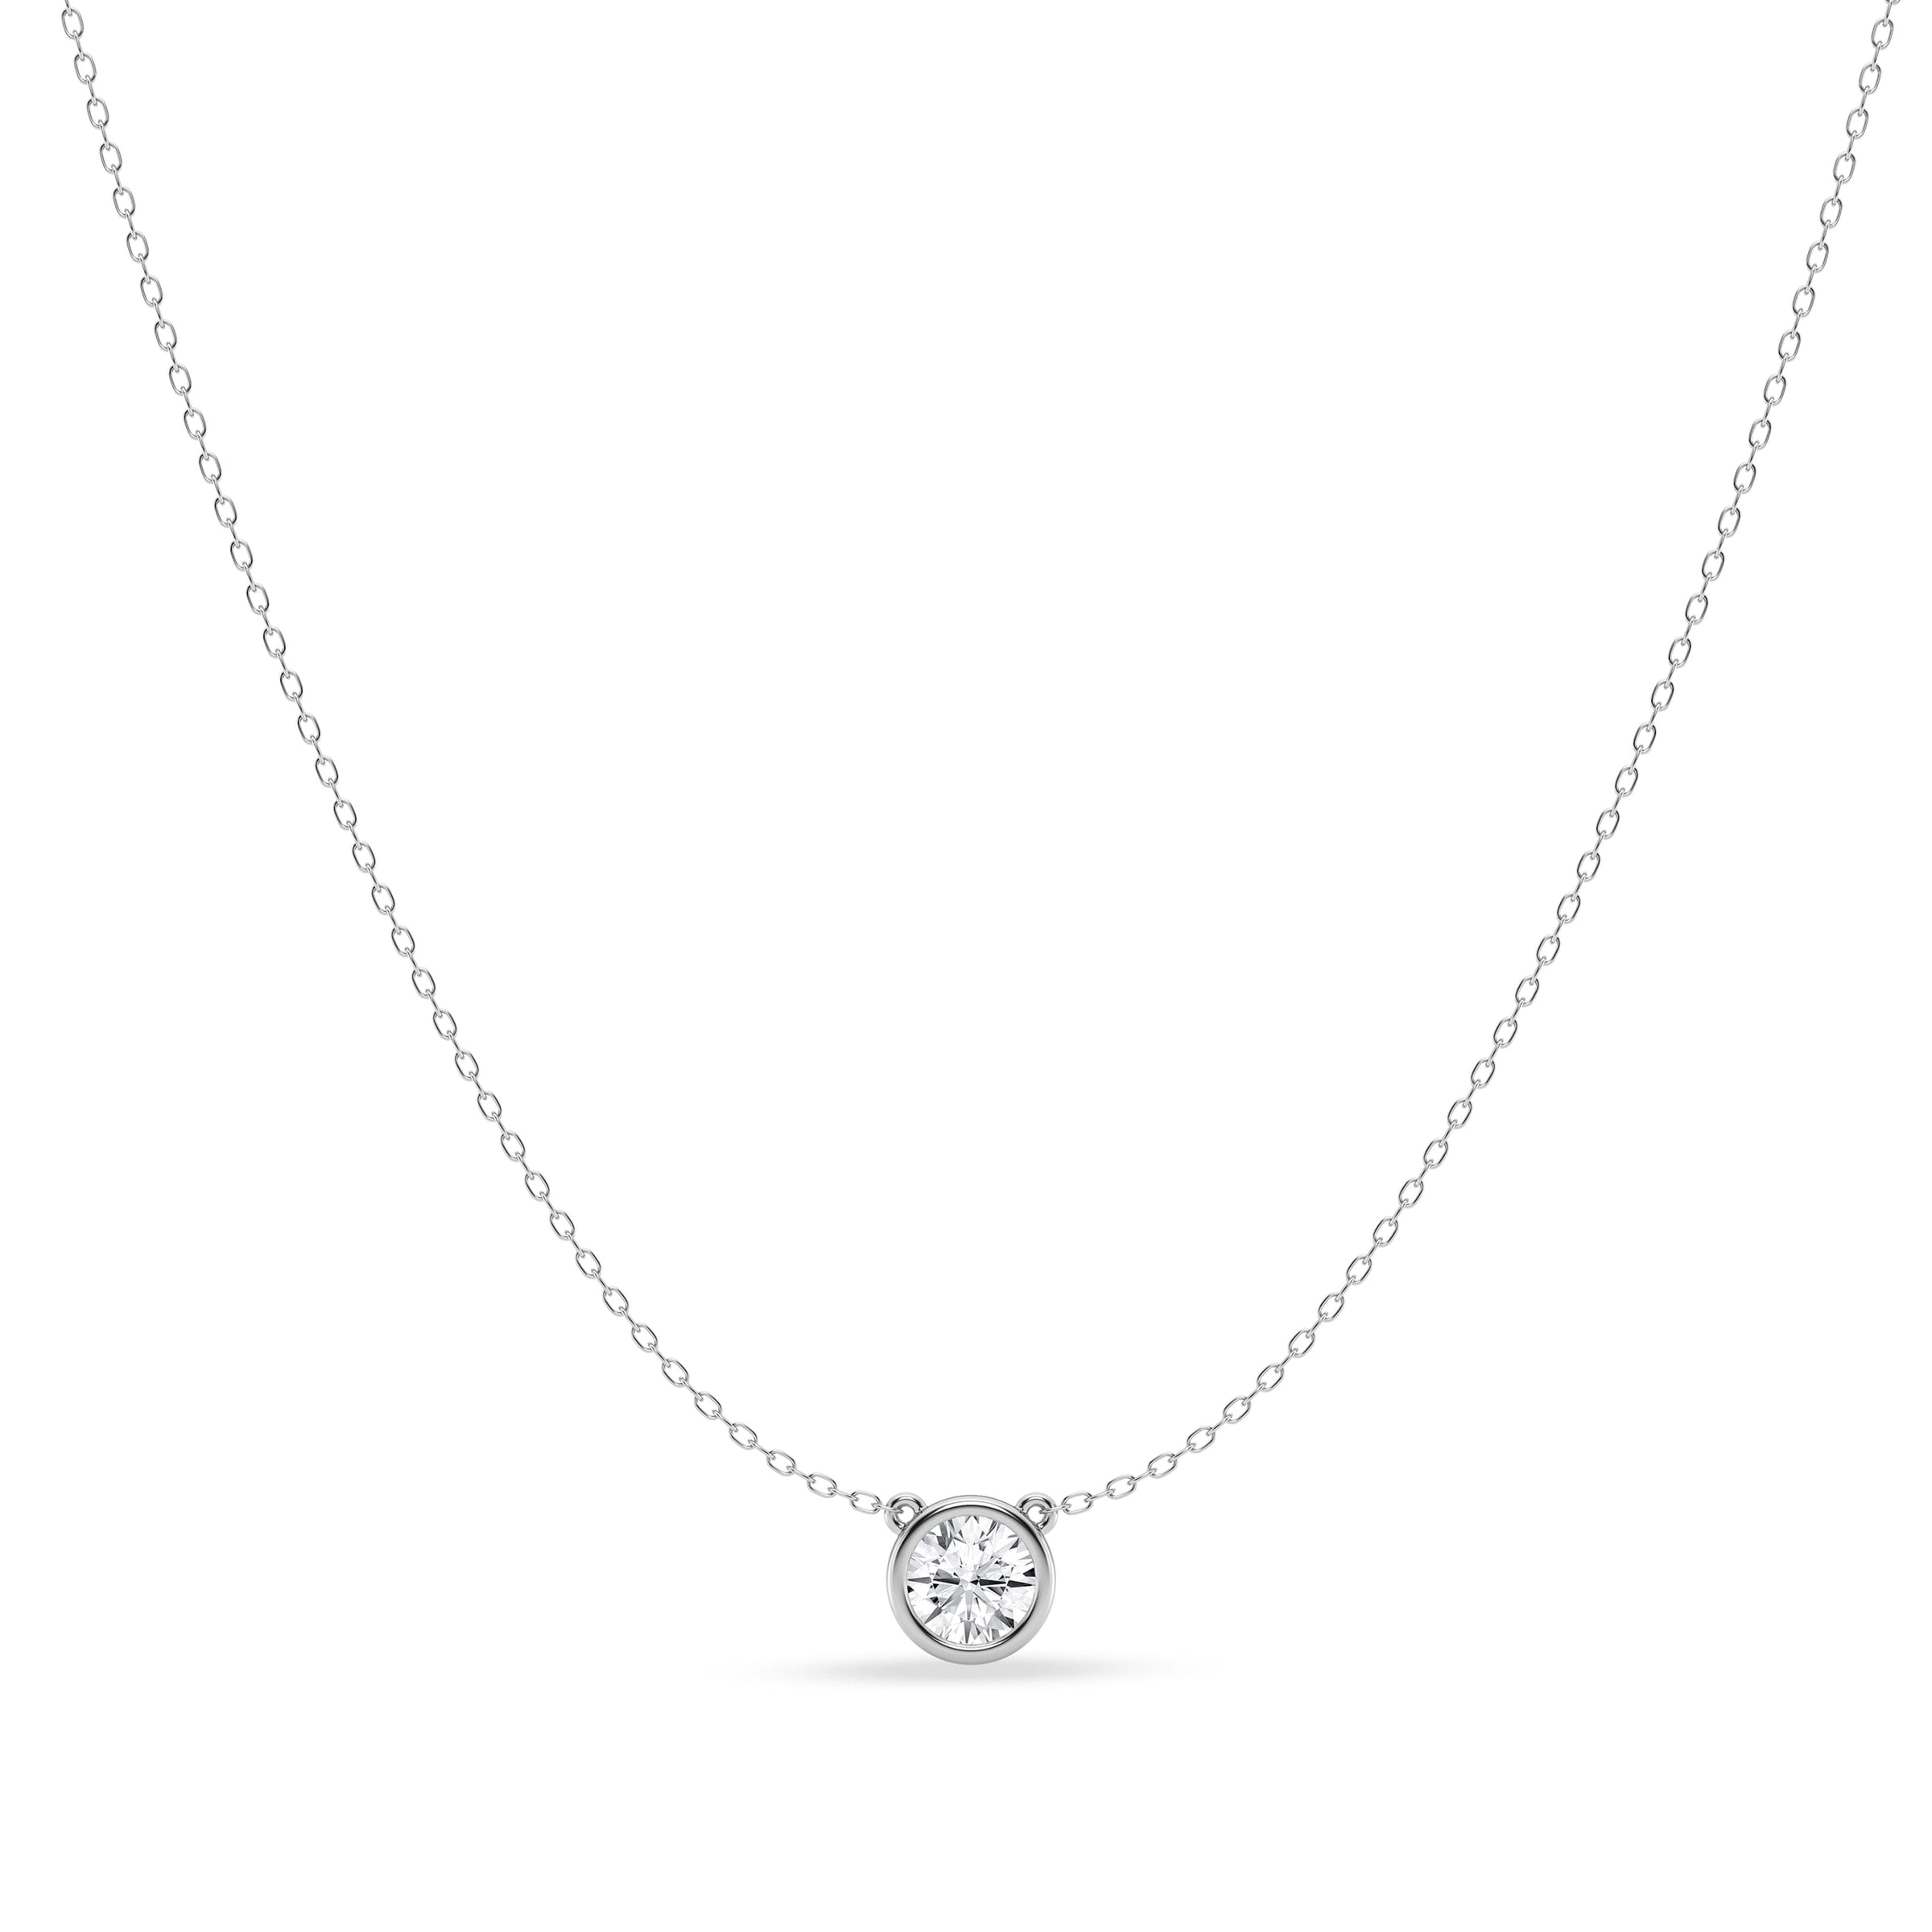 Mirage Slider Necklace with 1.00ct of Laboratory Grown Diamonds in Sterling Silver and Platinum Necklaces Bevilles 